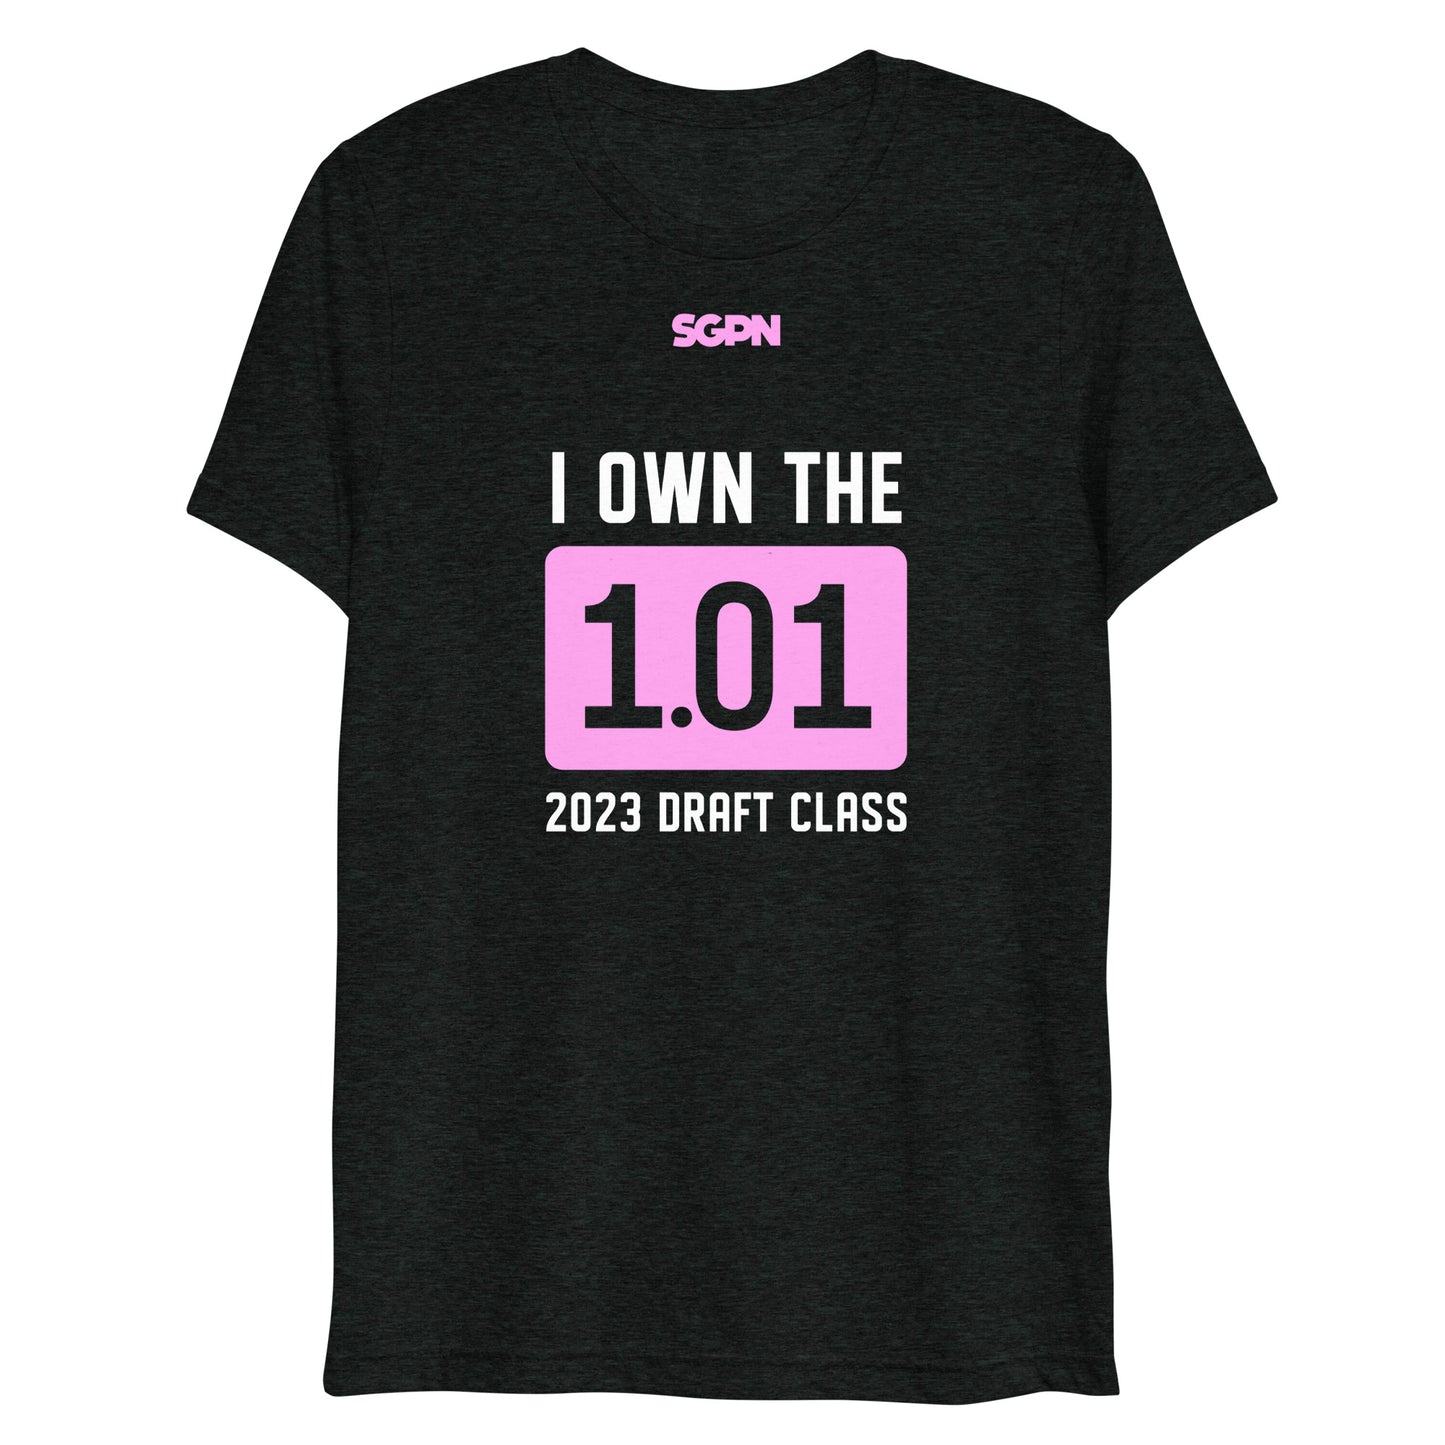 I own the 1.01 - Fantasy Football Podcast- Short sleeve t-shirt (Pink)